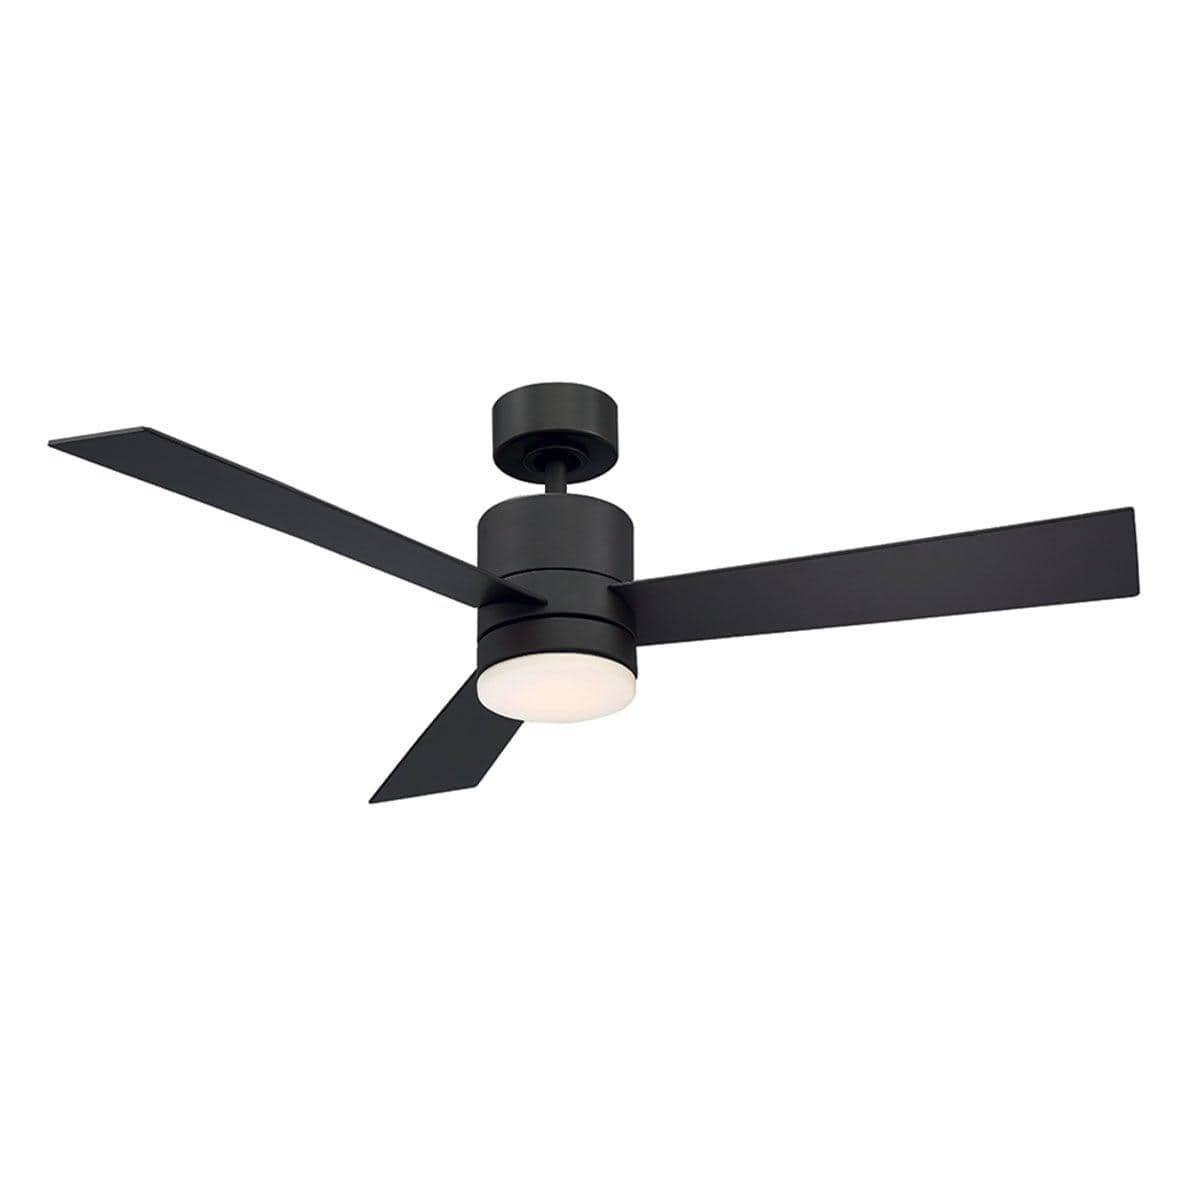 Modern Forms - Axis Ceiling Fan - FR-W1803-52L-BZ | Montreal Lighting & Hardware